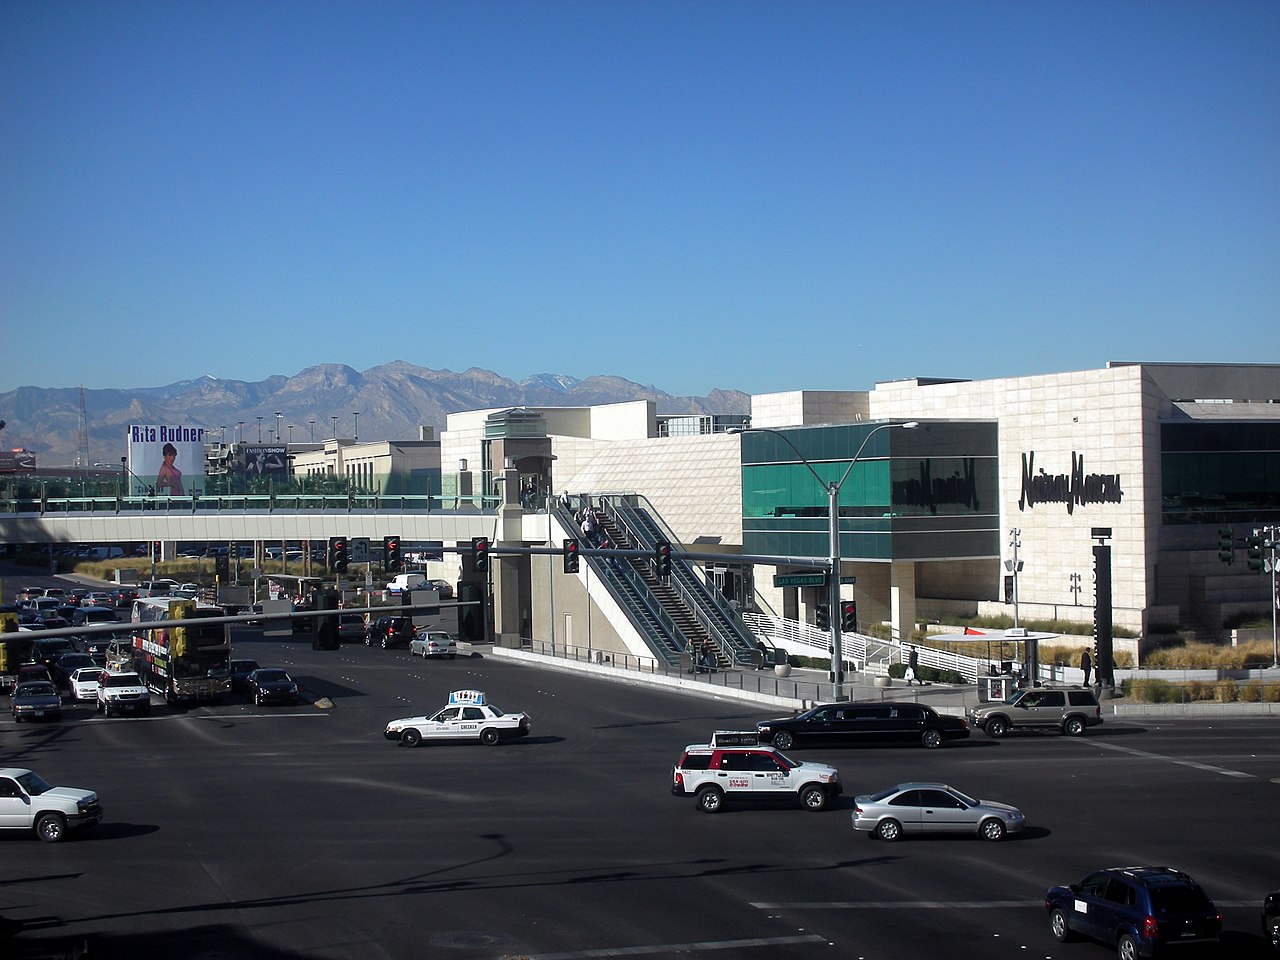 Las Vegas Fashion Show Mall With The Neiman Marcus Store On The Las Vegas  Strip. The Stratosphere Tower Can Be Seen In The Far Background Stock  Photo, Picture and Royalty Free Image.